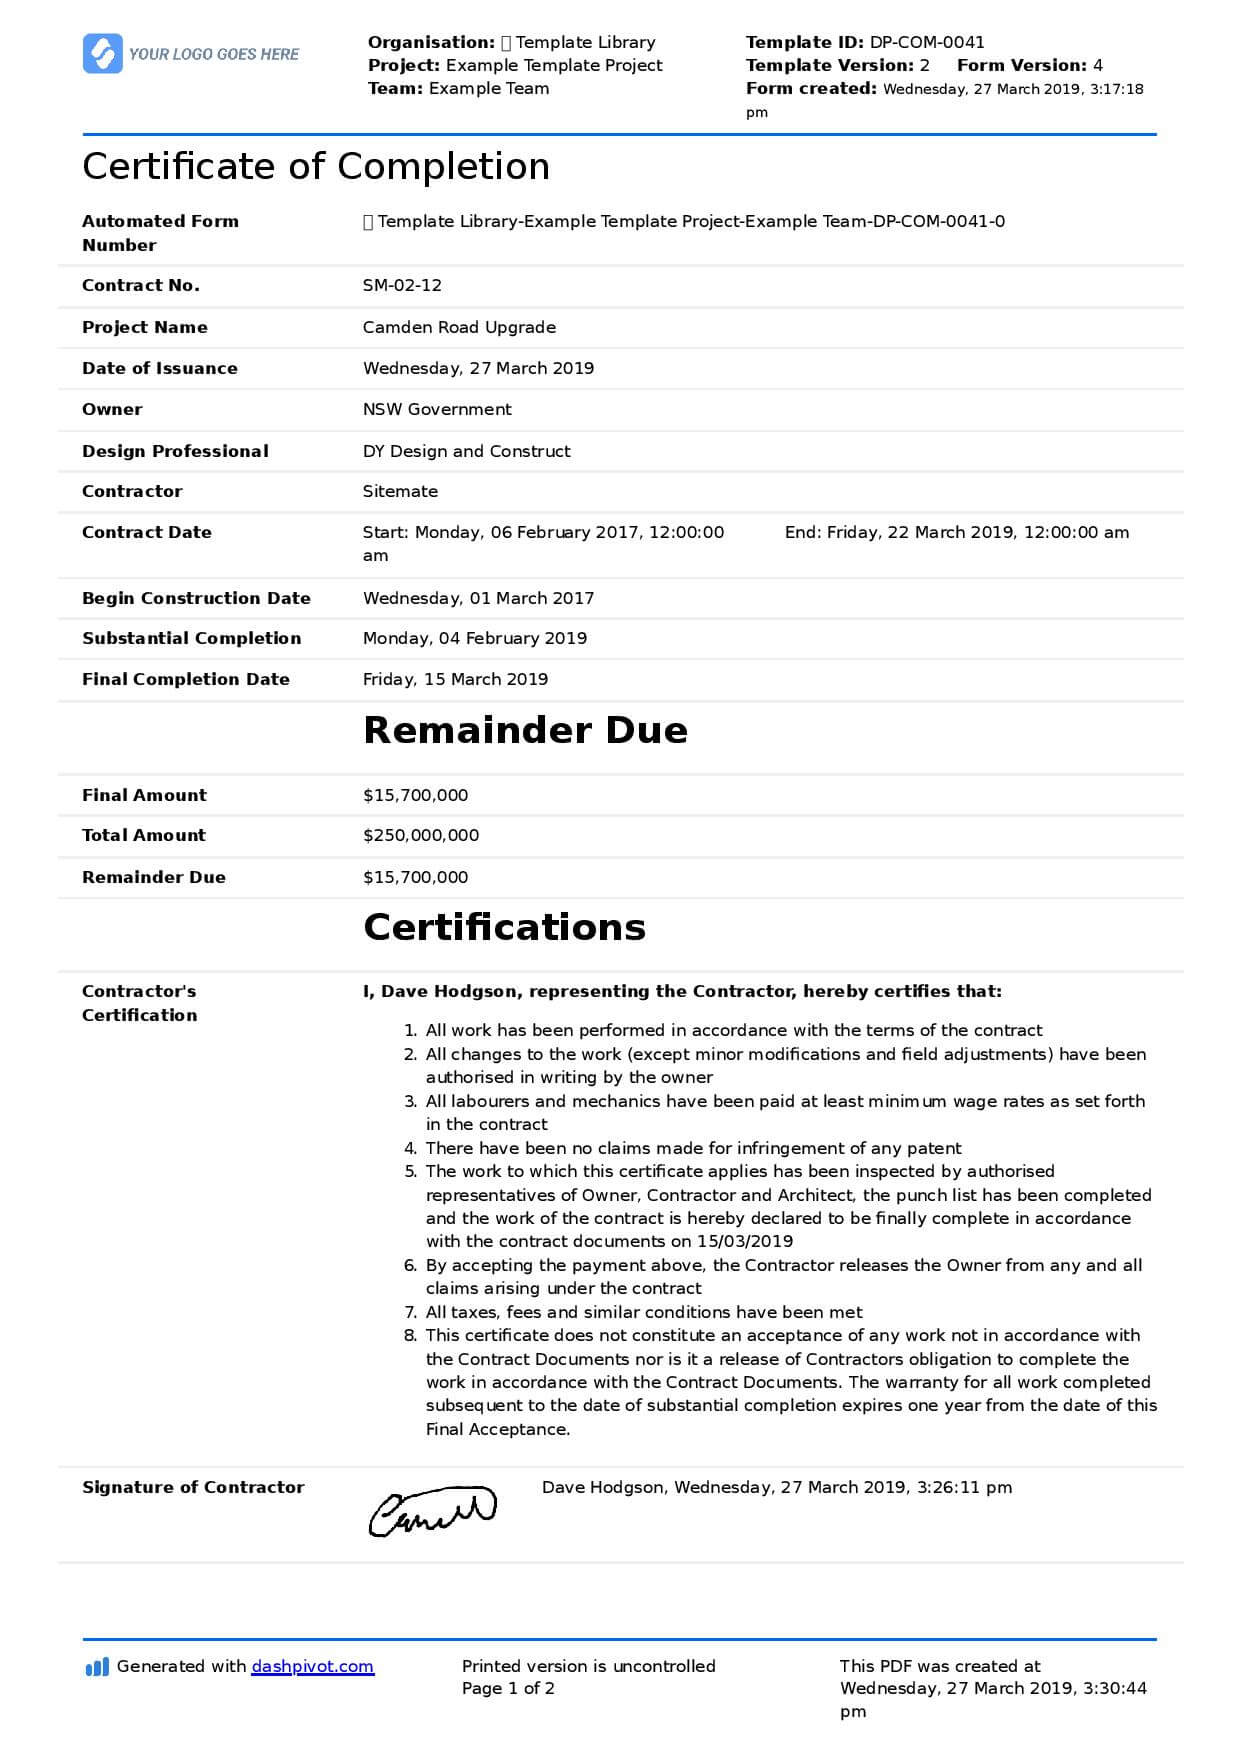 Certificate Of Completion For Construction (Free Template + With Regard To Certificate Template For Project Completion